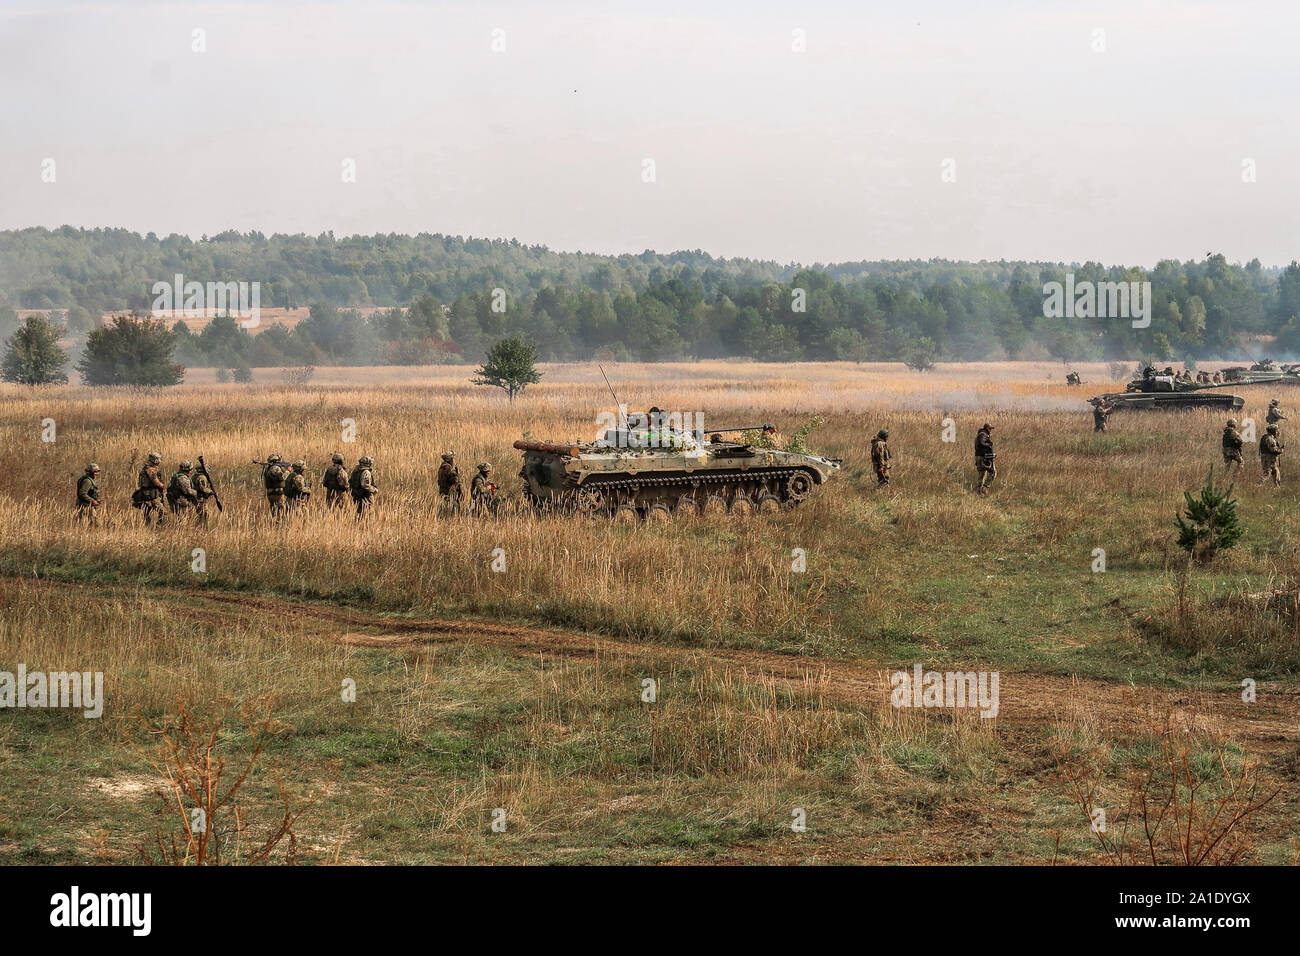 The 10th Mountain Assault Brigade conducts combined arms operations during their brigade field training exercise (FTX) at Combat Training Center-Yavoriv, Sept. 25 2019. Stock Photo